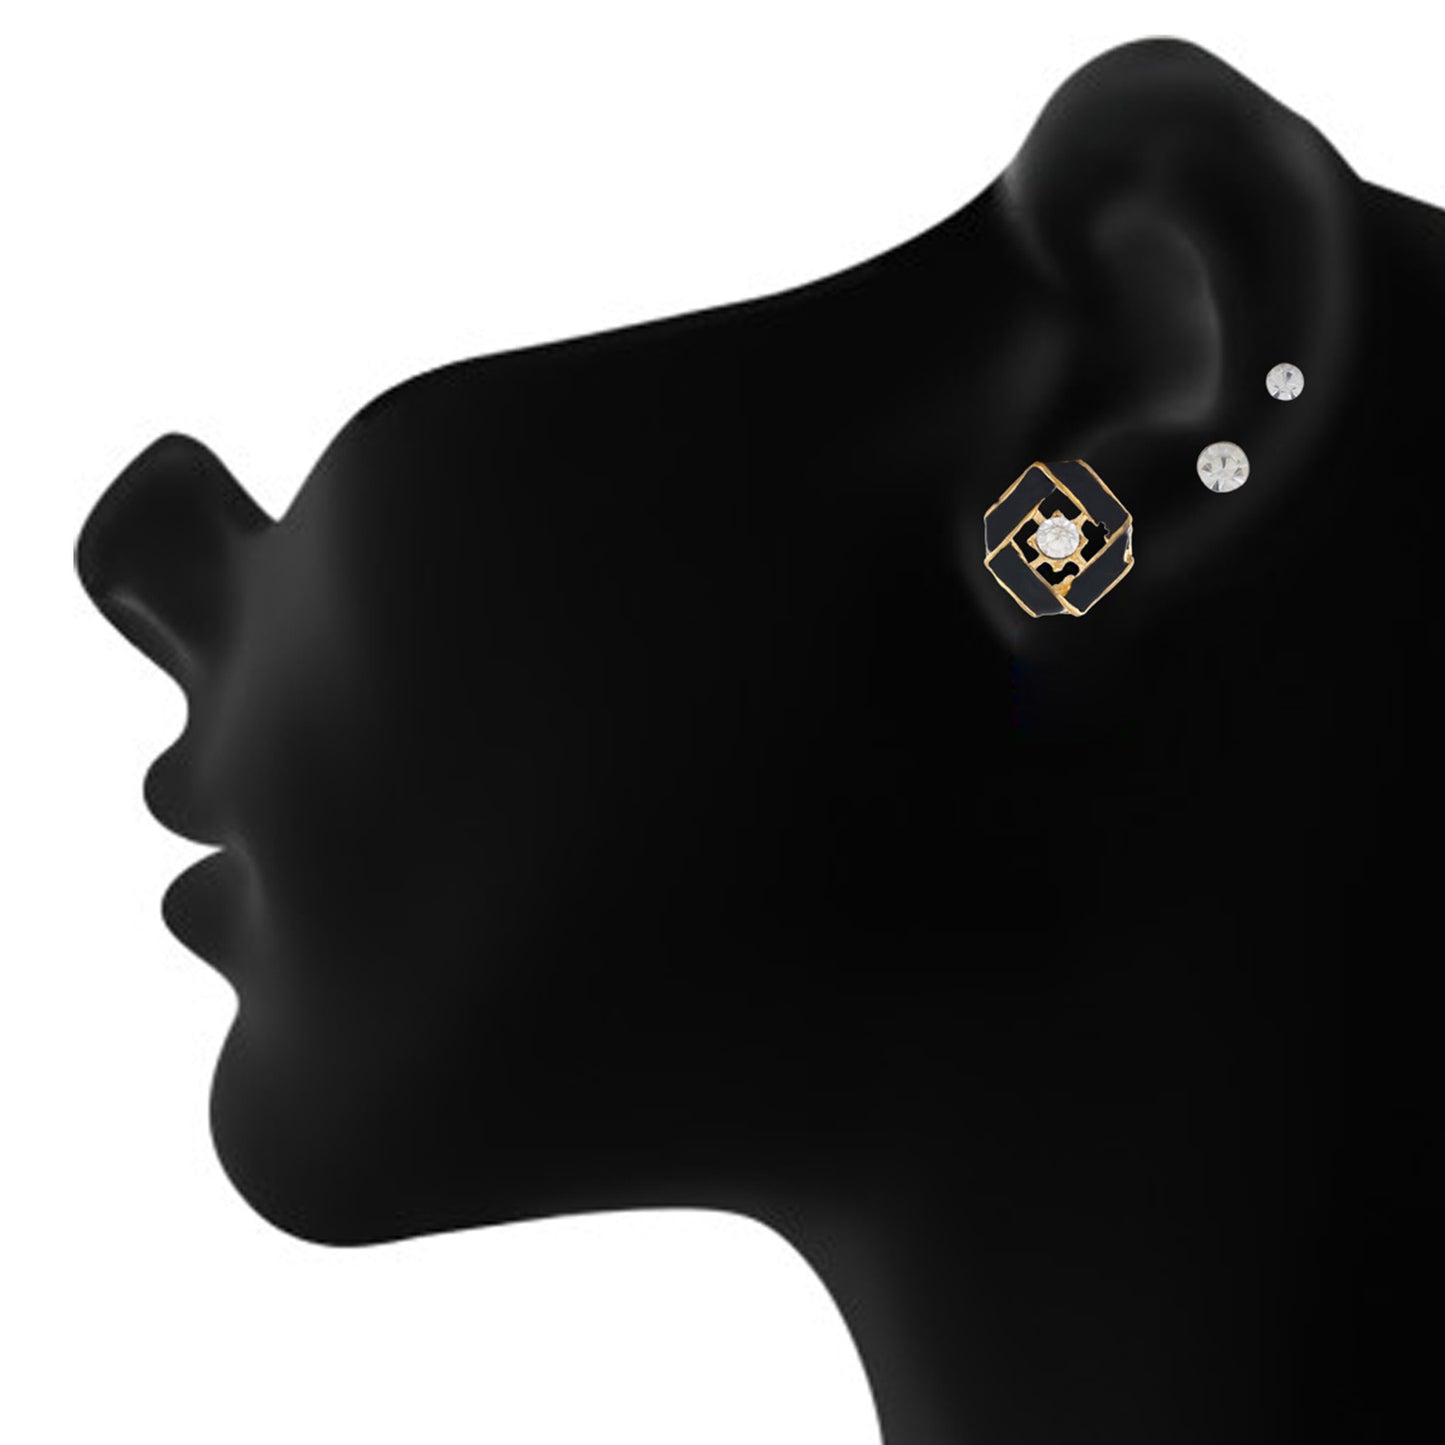 Black colour Geometrical design  Studs for girls and women